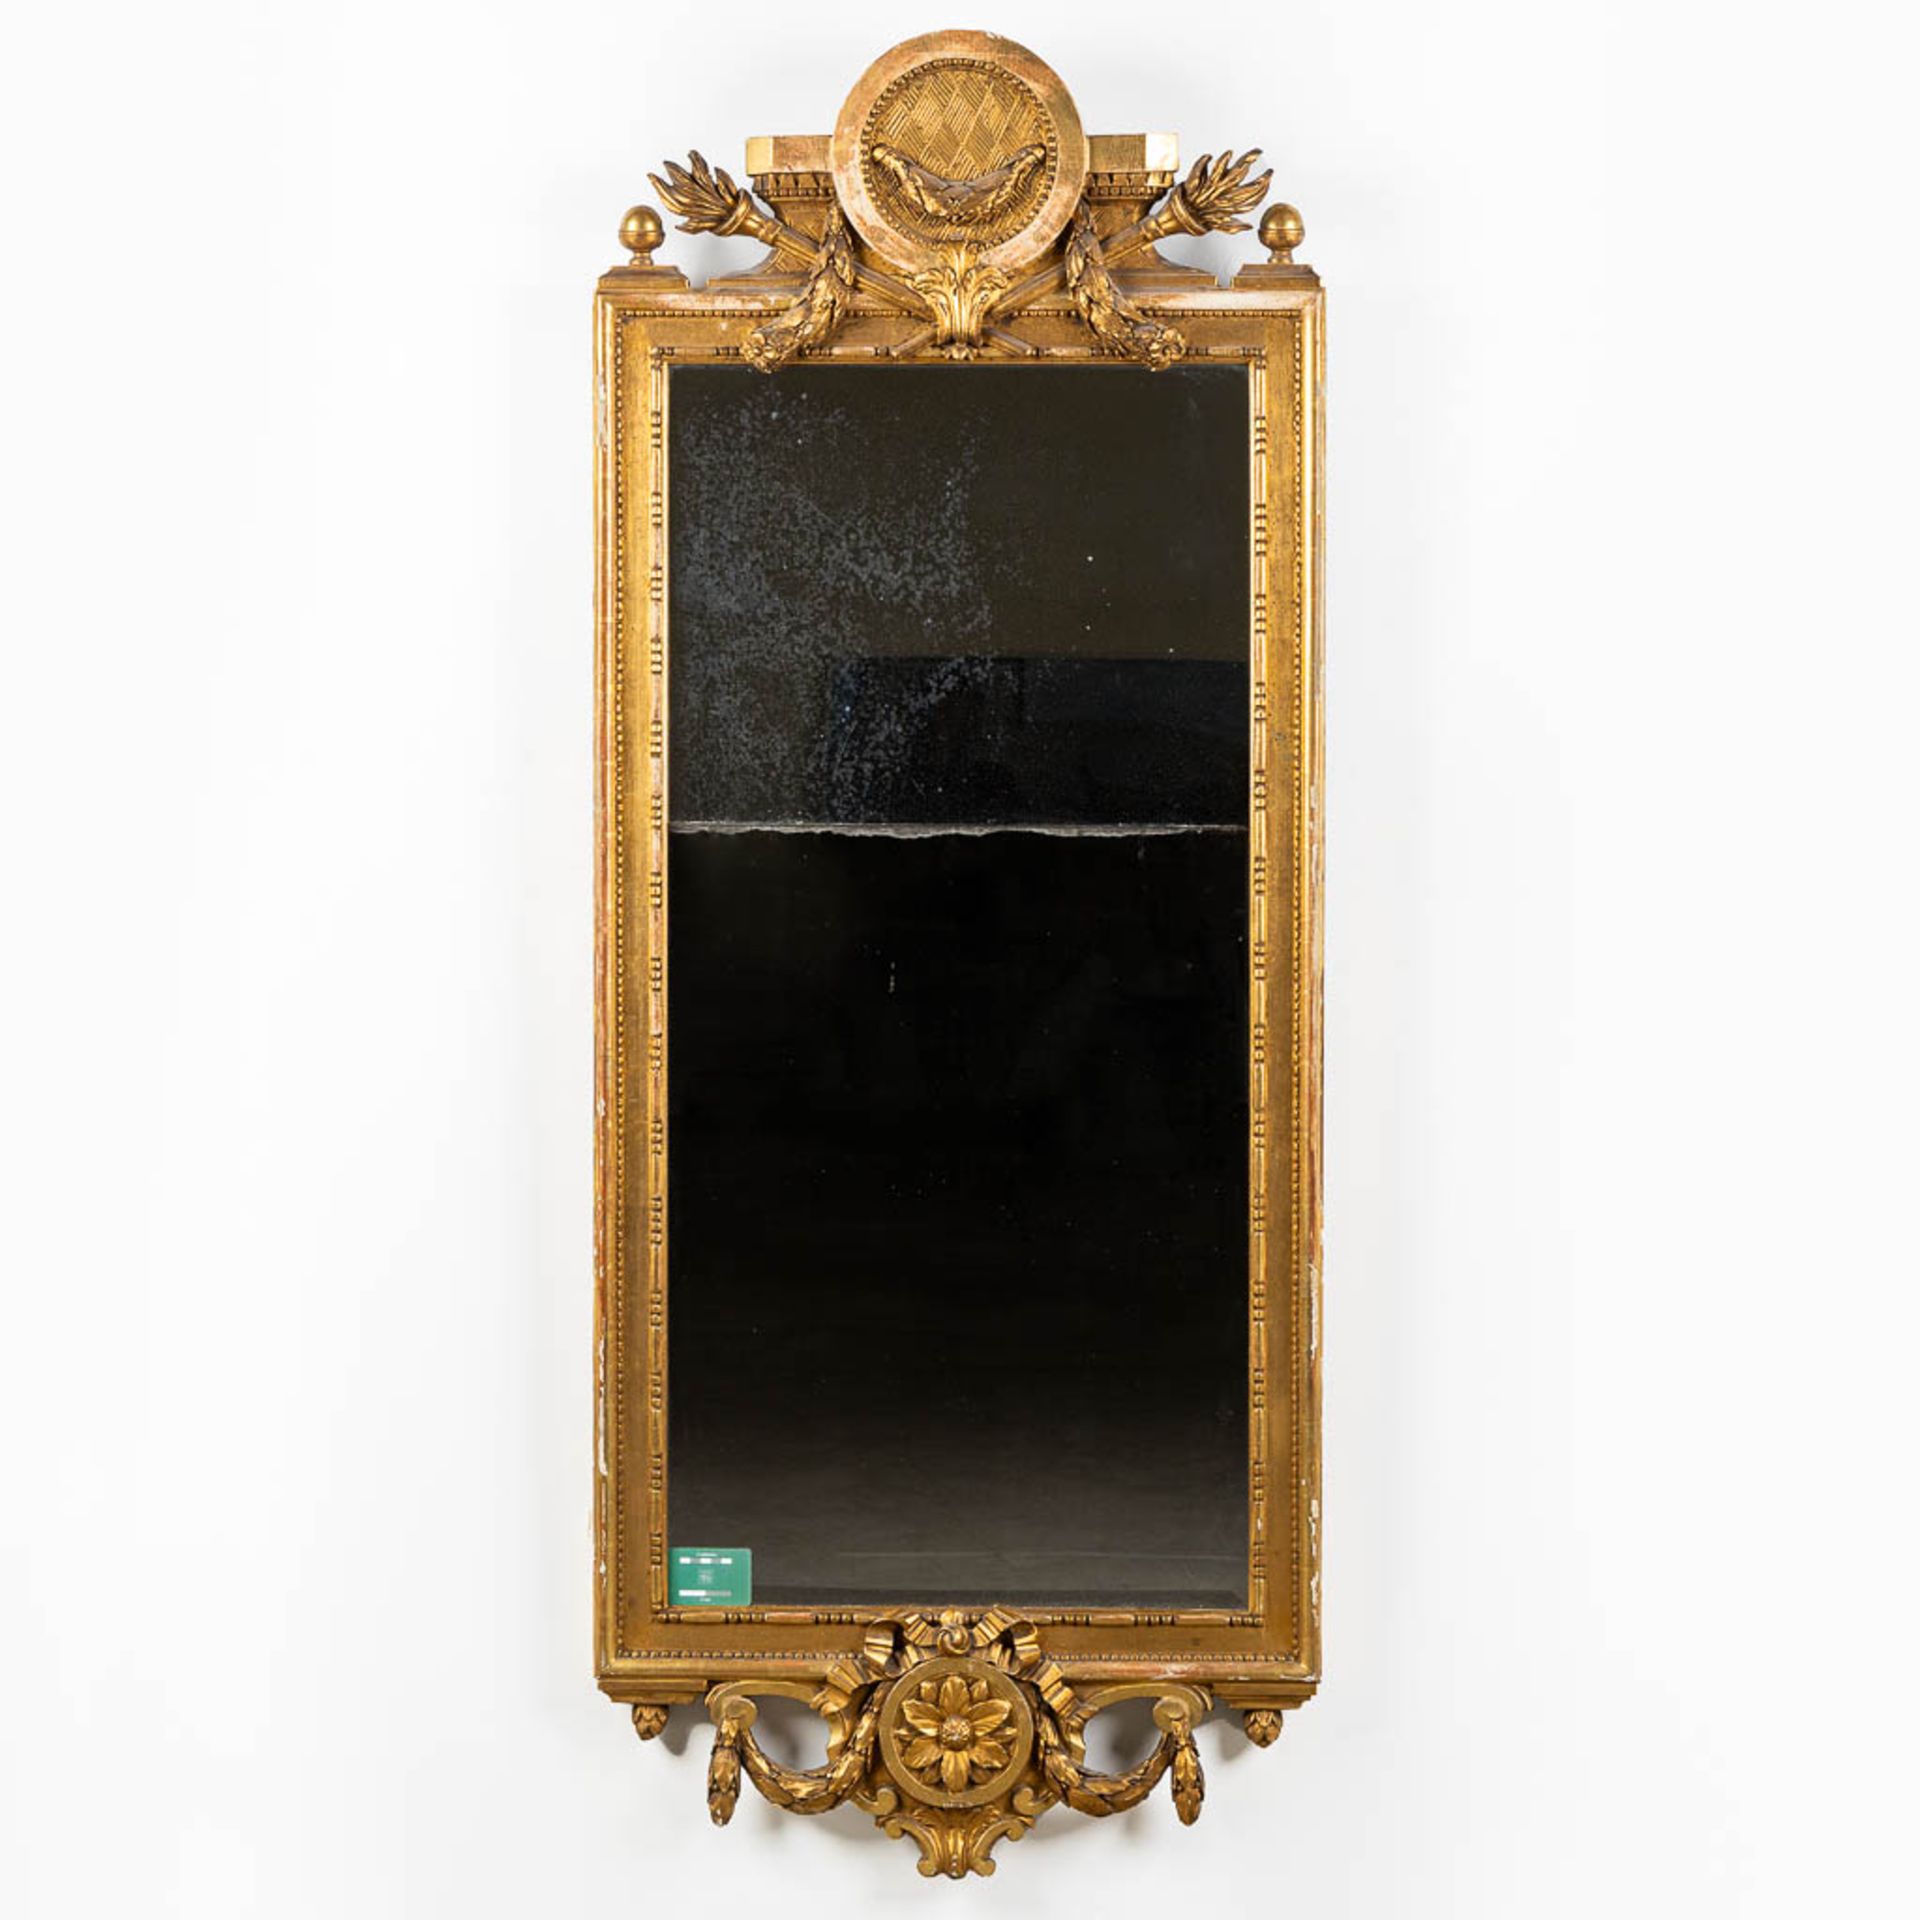 An antique mirror, gilt wood. Probably Scandinavia, Sweden. 19th C. (W:70 x H:178 cm) - Image 2 of 8